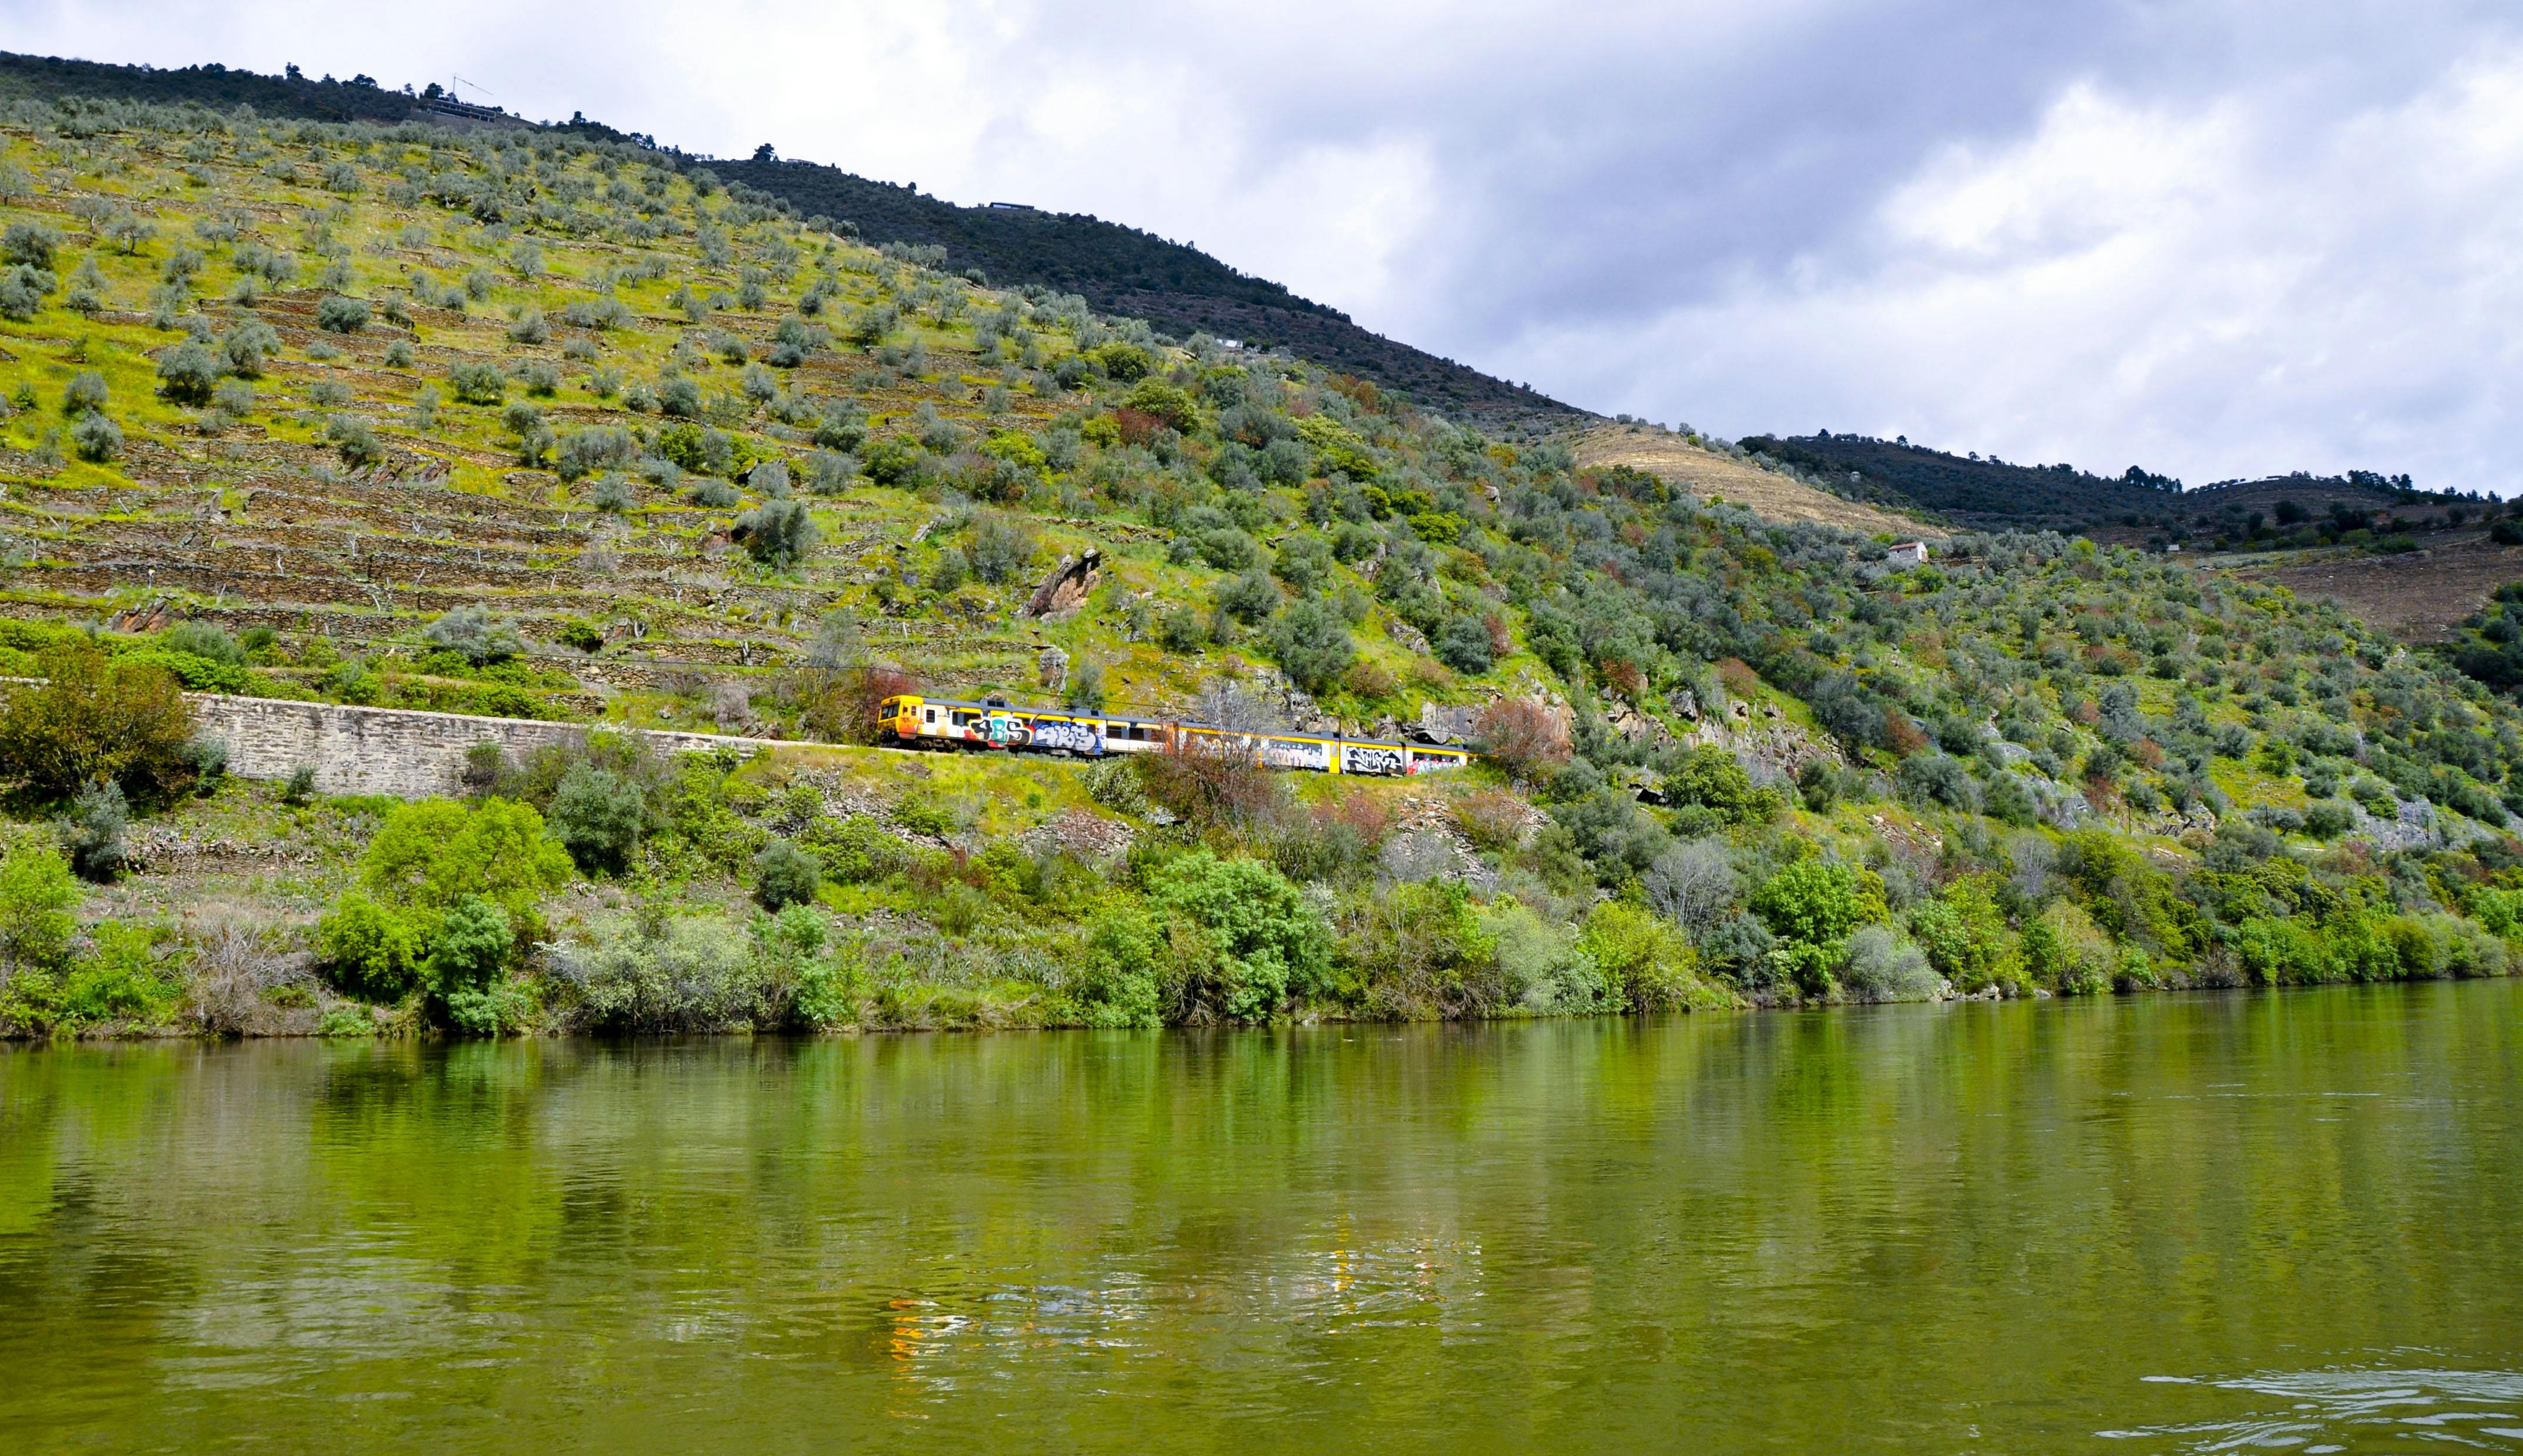 Douro valley tour - Wine tasting, lunch & river cruise-1